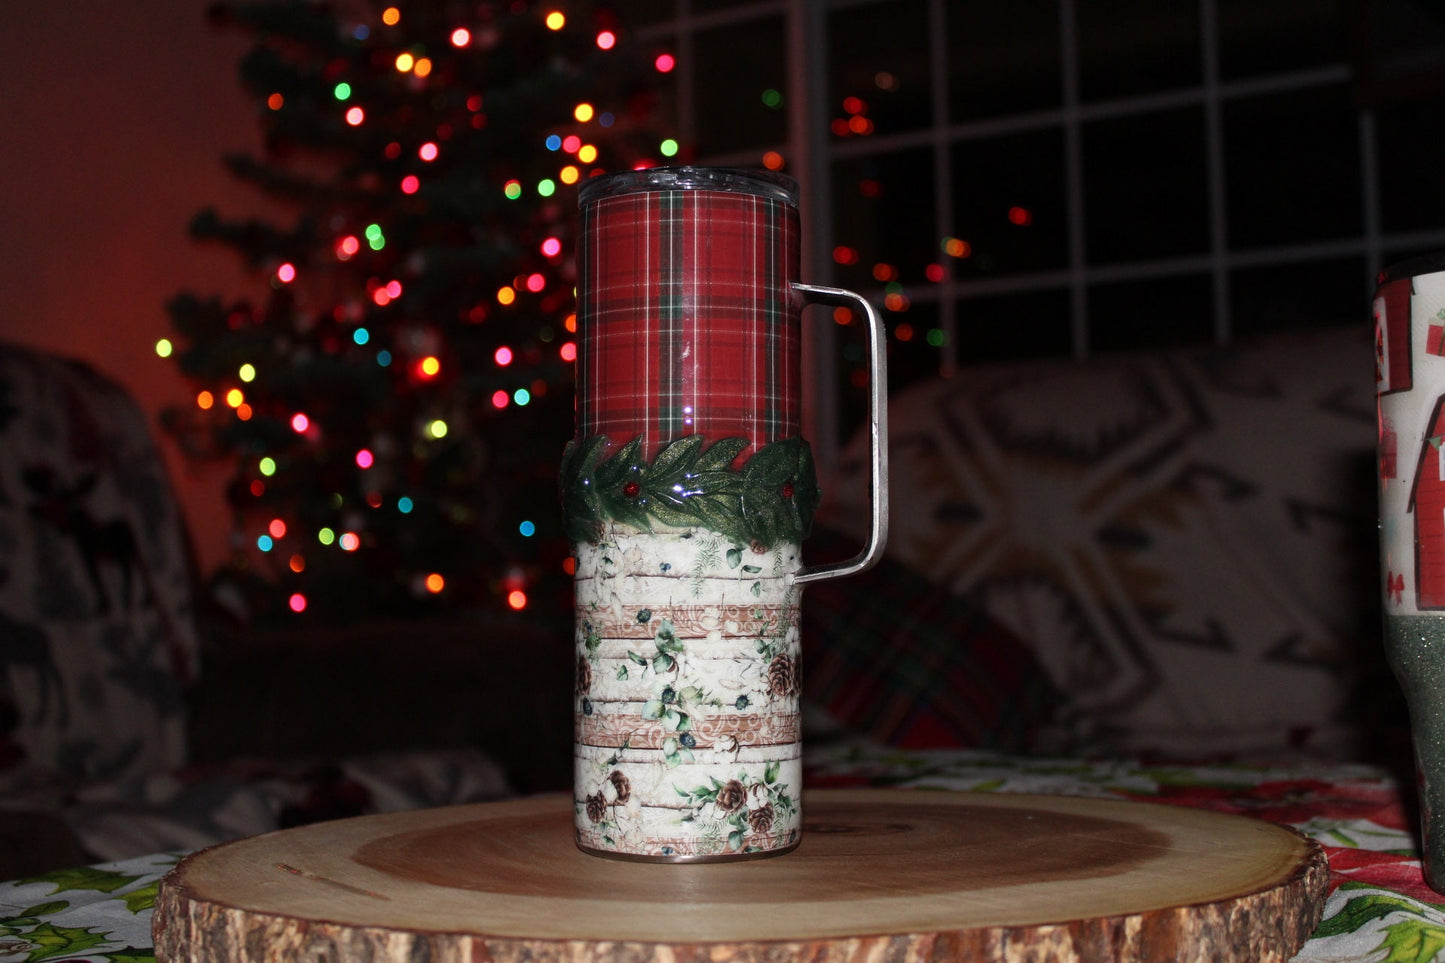 Christmas tumbler with holly accent.  20 oz. stainless steel tumbler with lid and reusable straw.